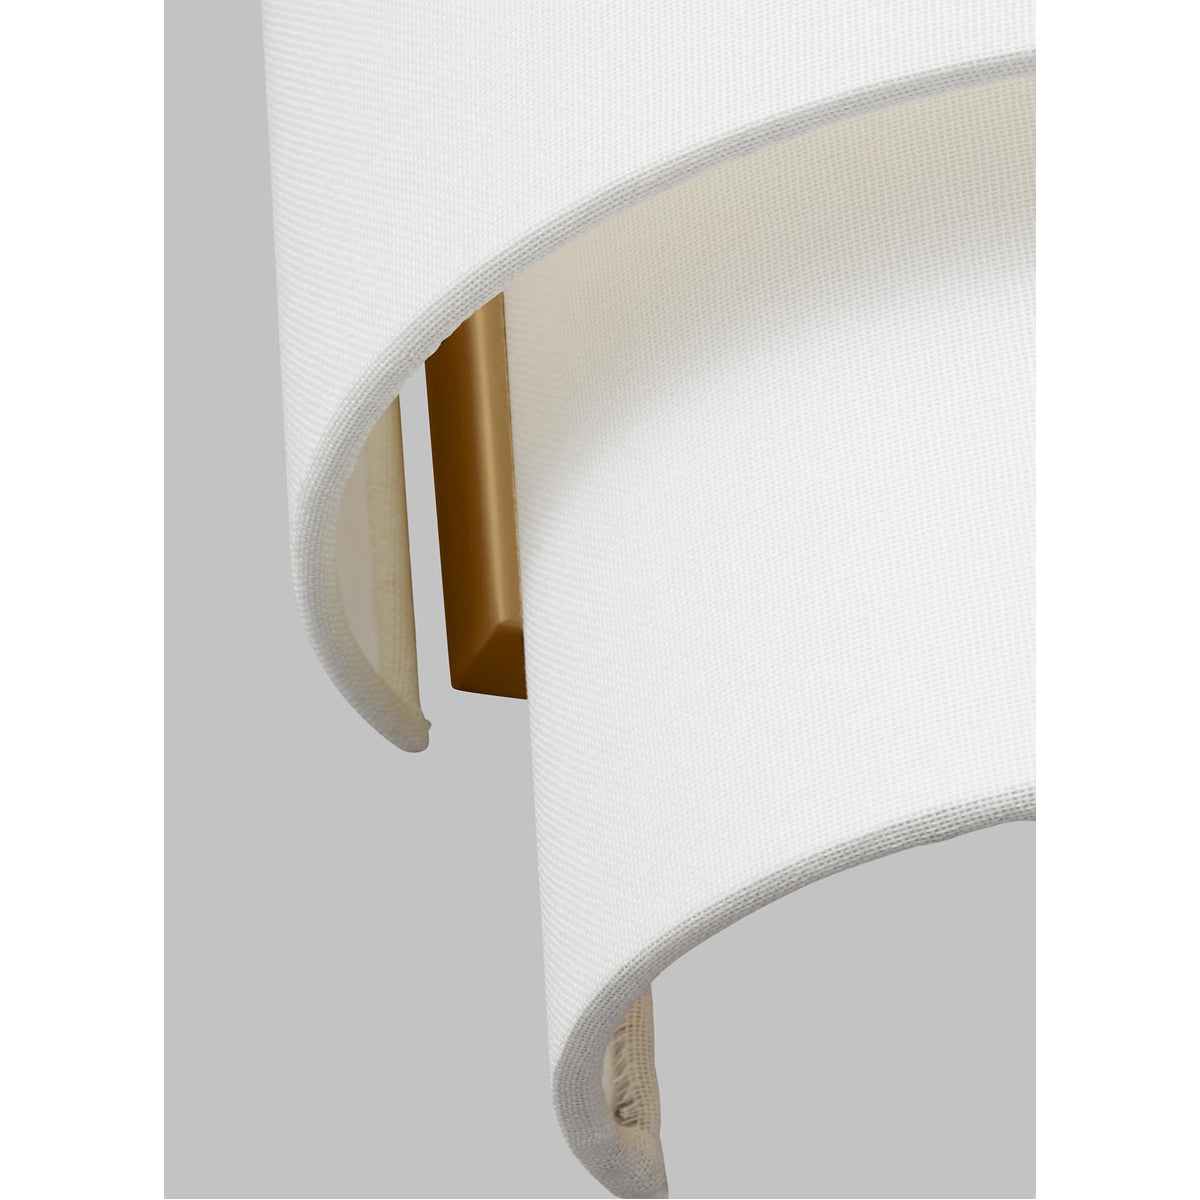 Feiss Kate Spade New York Sawyer Sconce